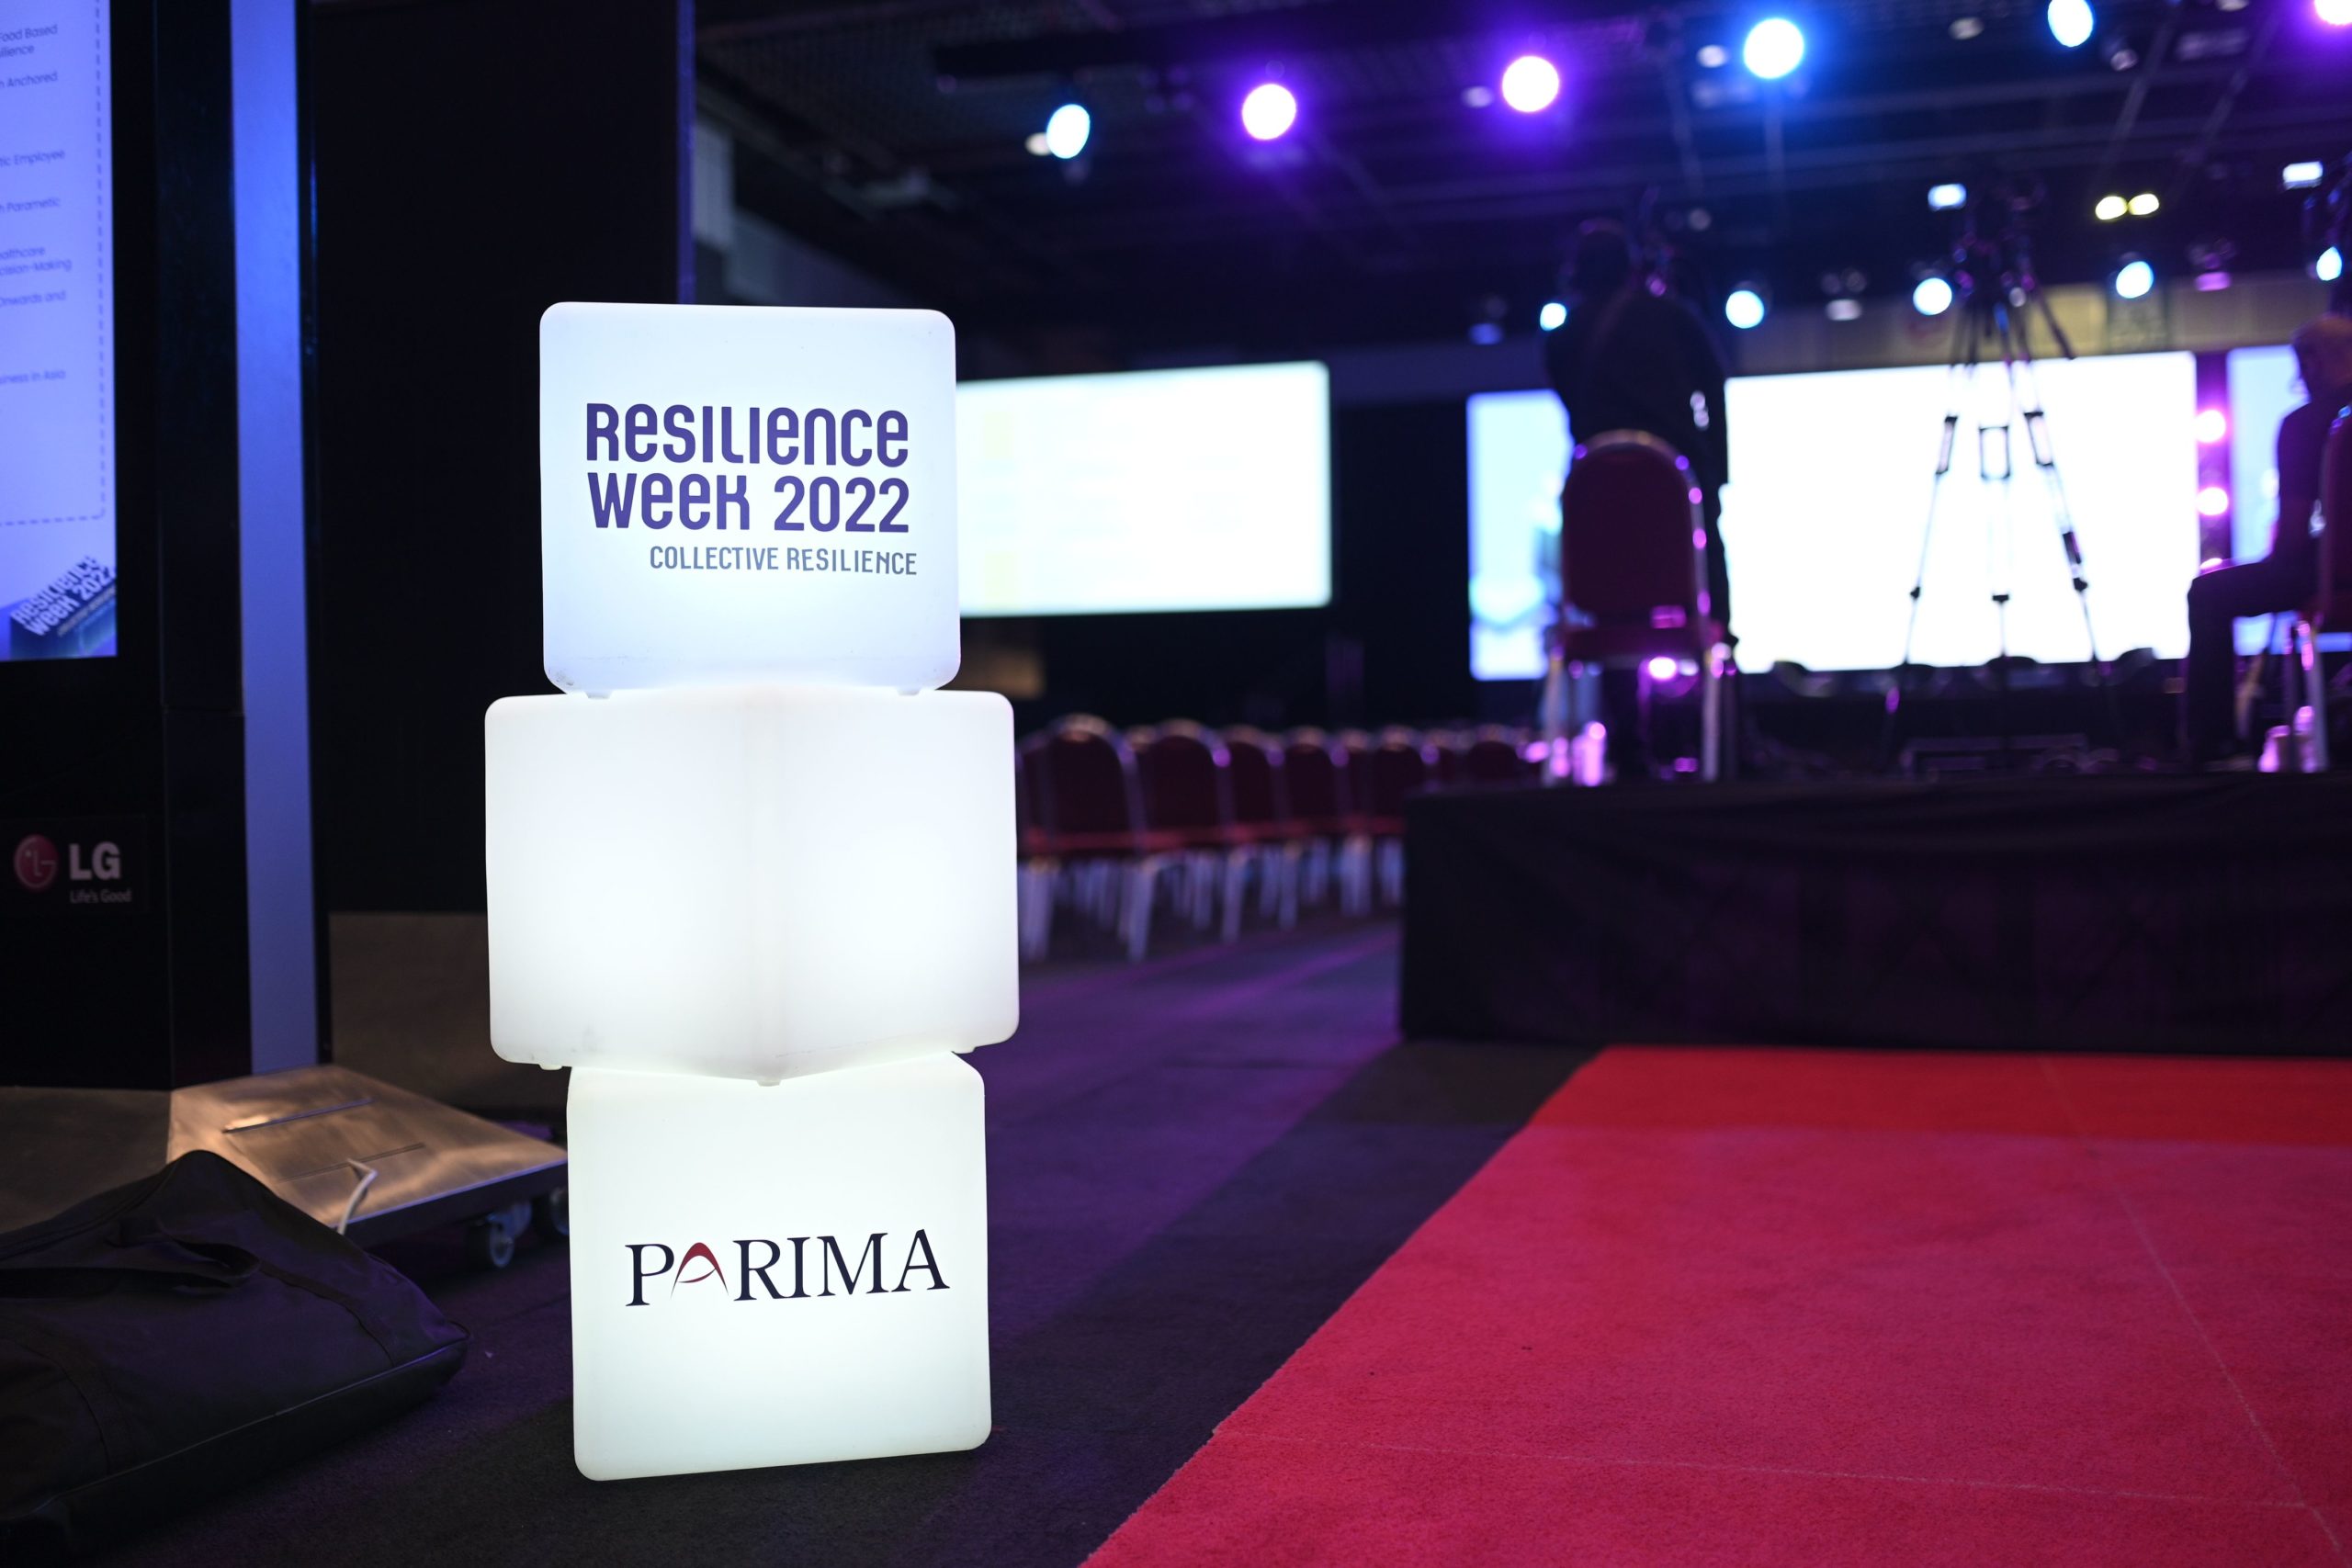 Four major themes from PARIMA 2022